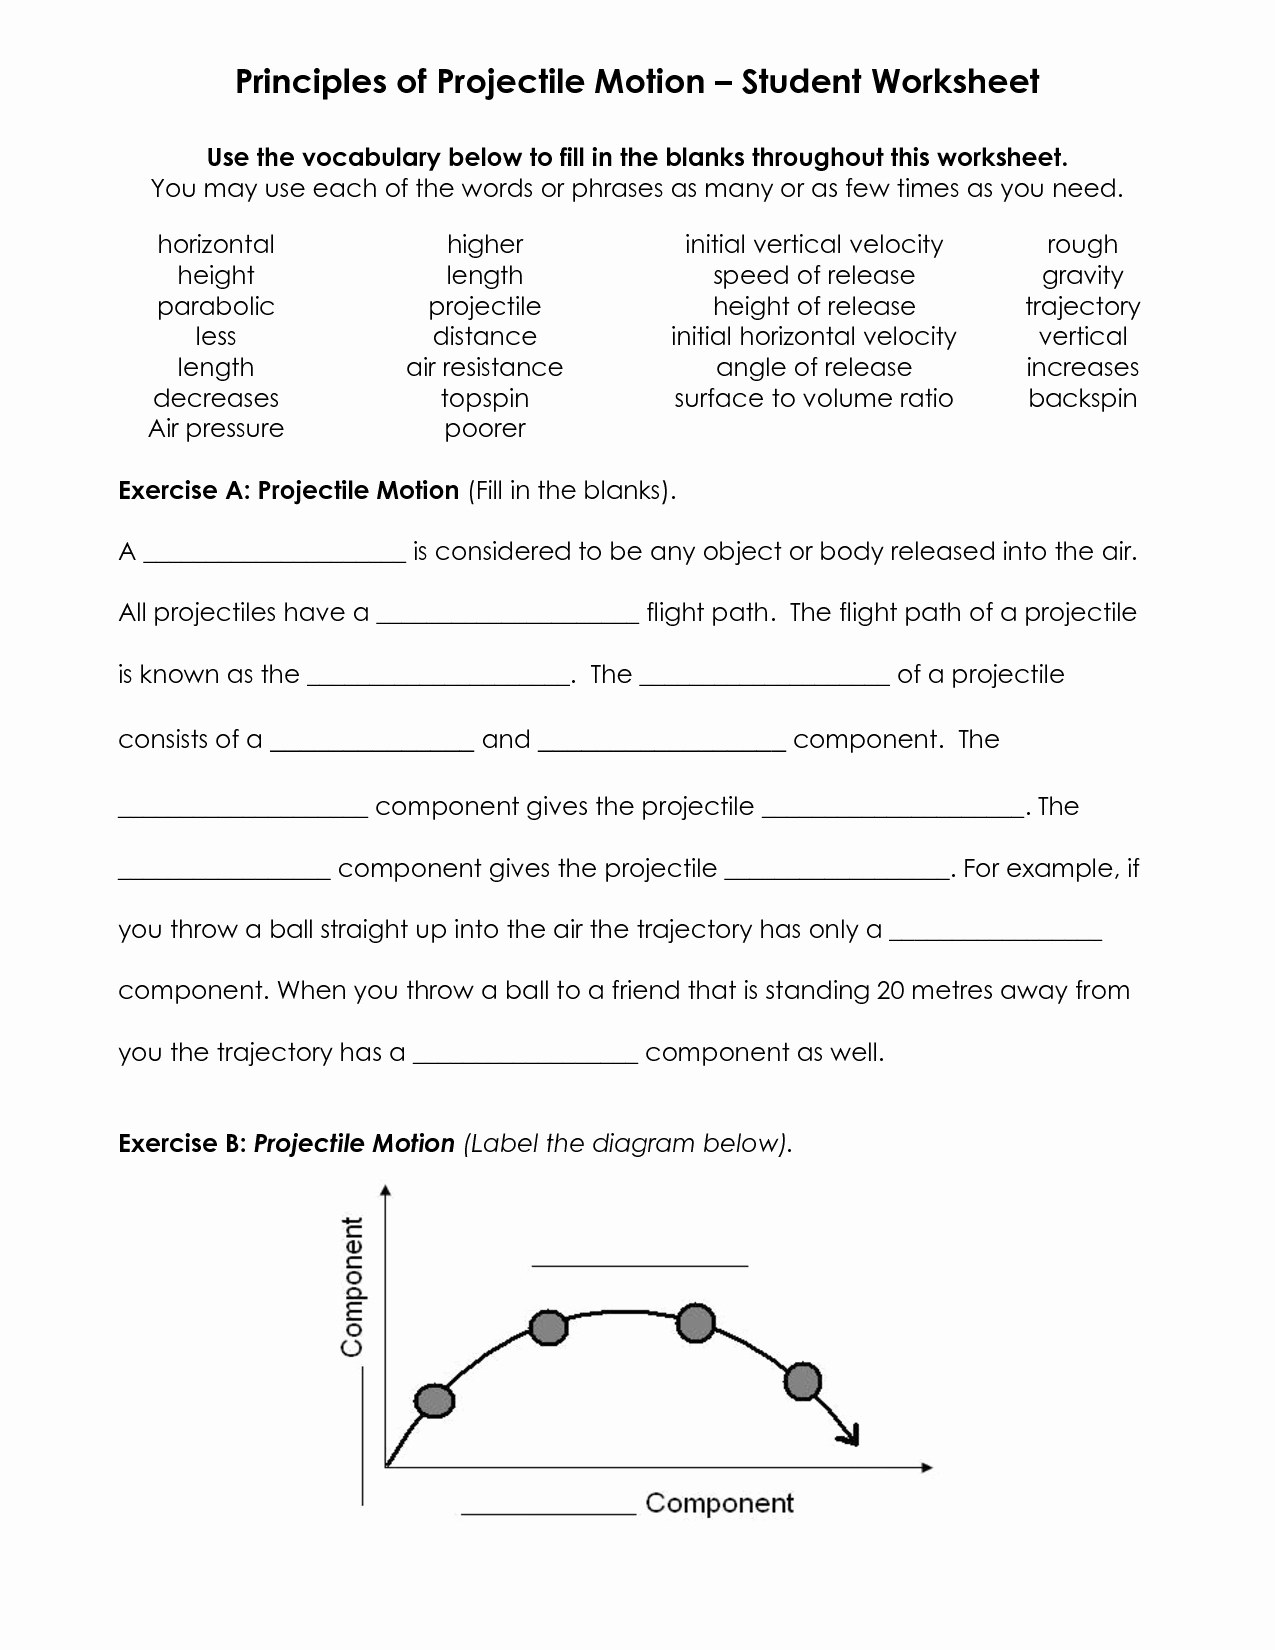 Projectile Motion Worksheet with Answers Lovely Worksheet Projectile Problems